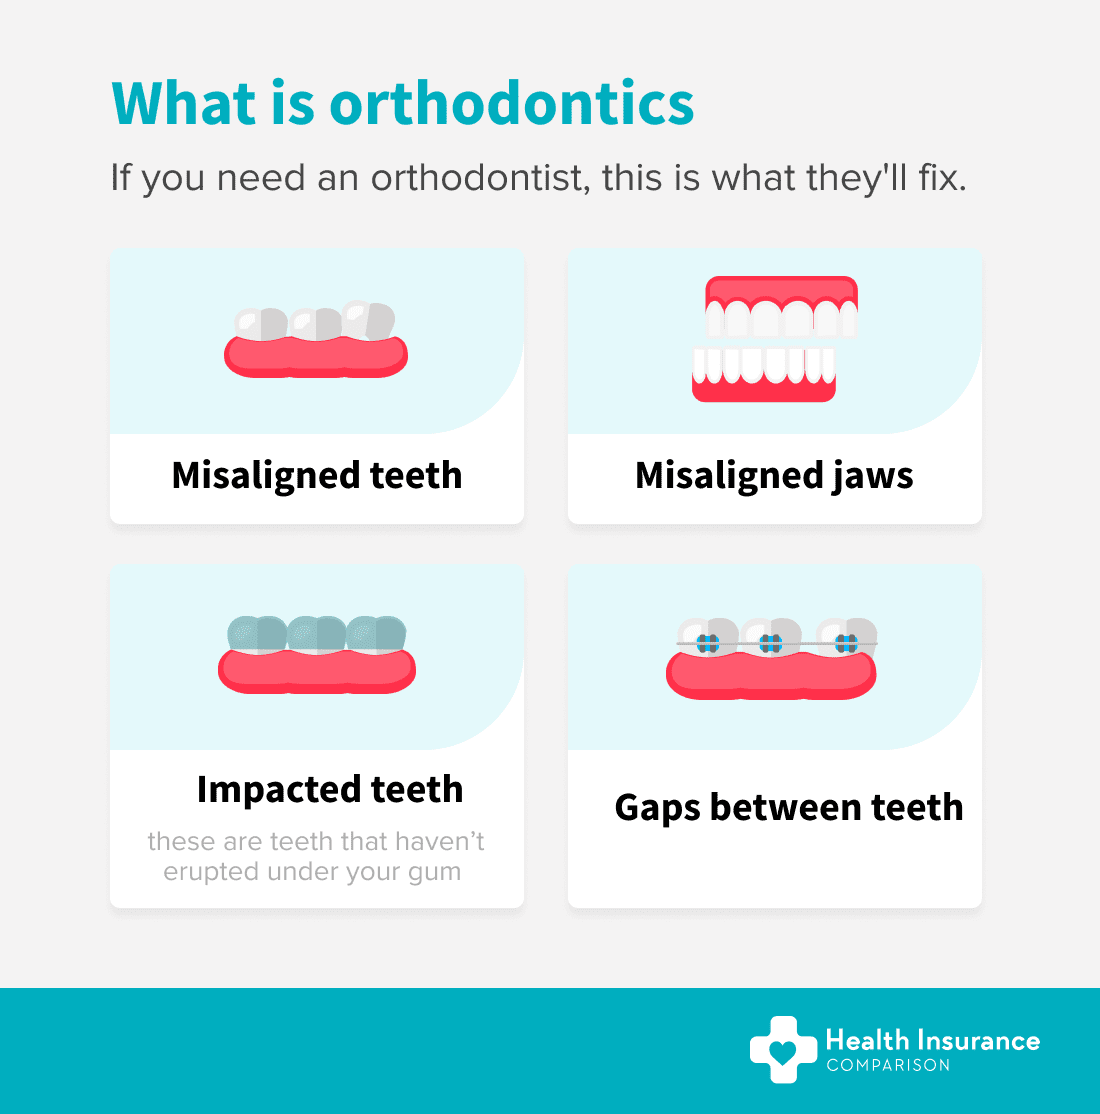 A guide to orthodontic treatment